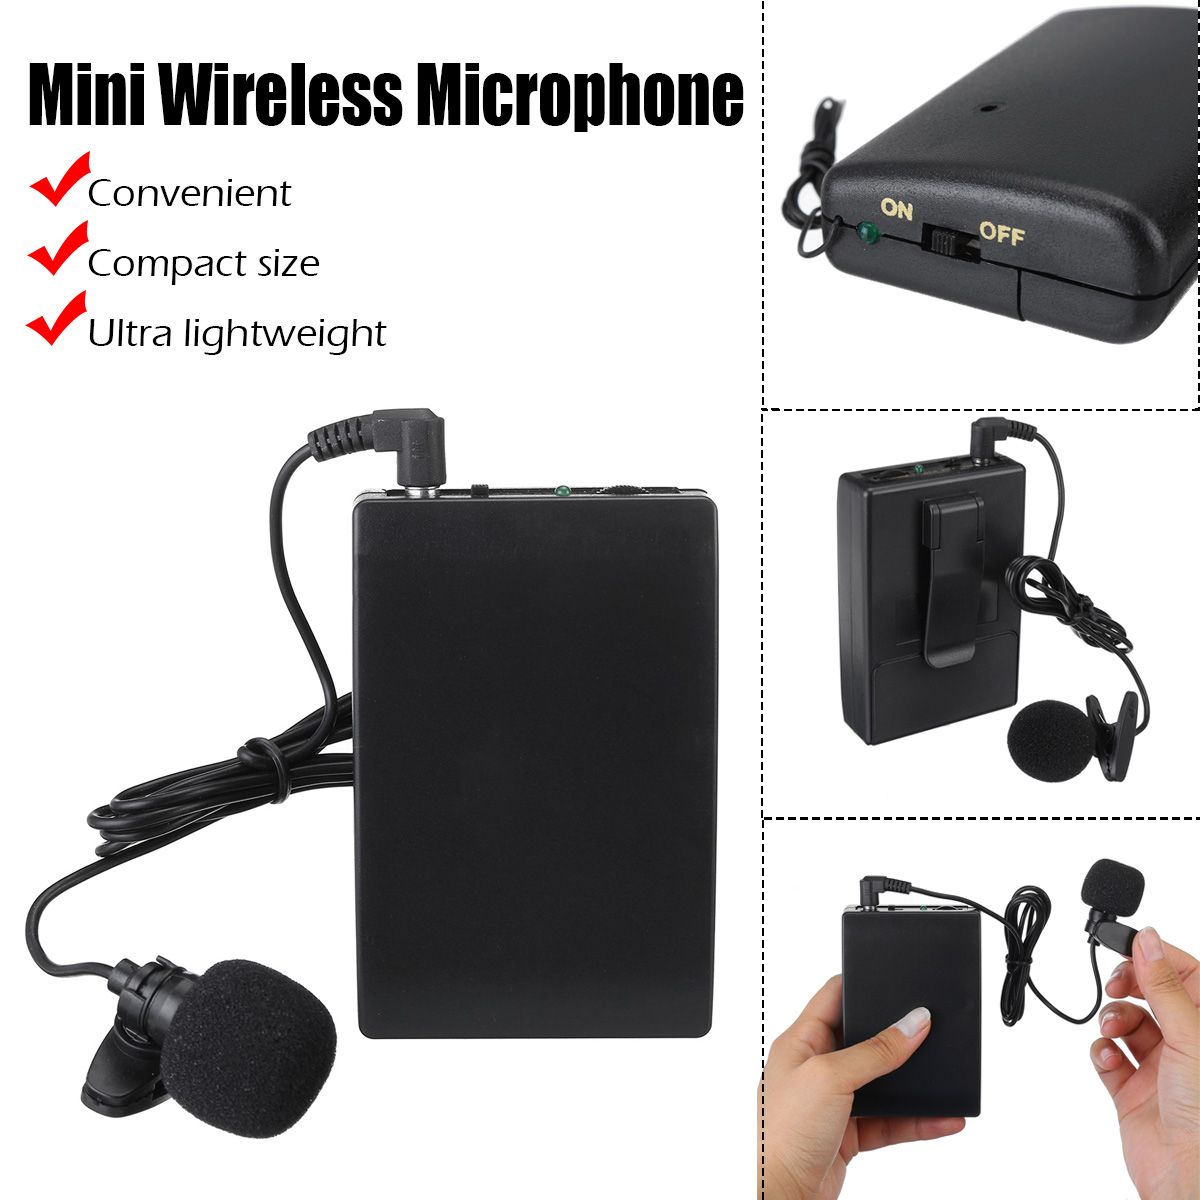 Mini-Wireless-Cordless-Clip-on-Lapel-Tie-Microphone-Mic-Transmitter-Set-for-Teacher-Lecturer-Office--1665388